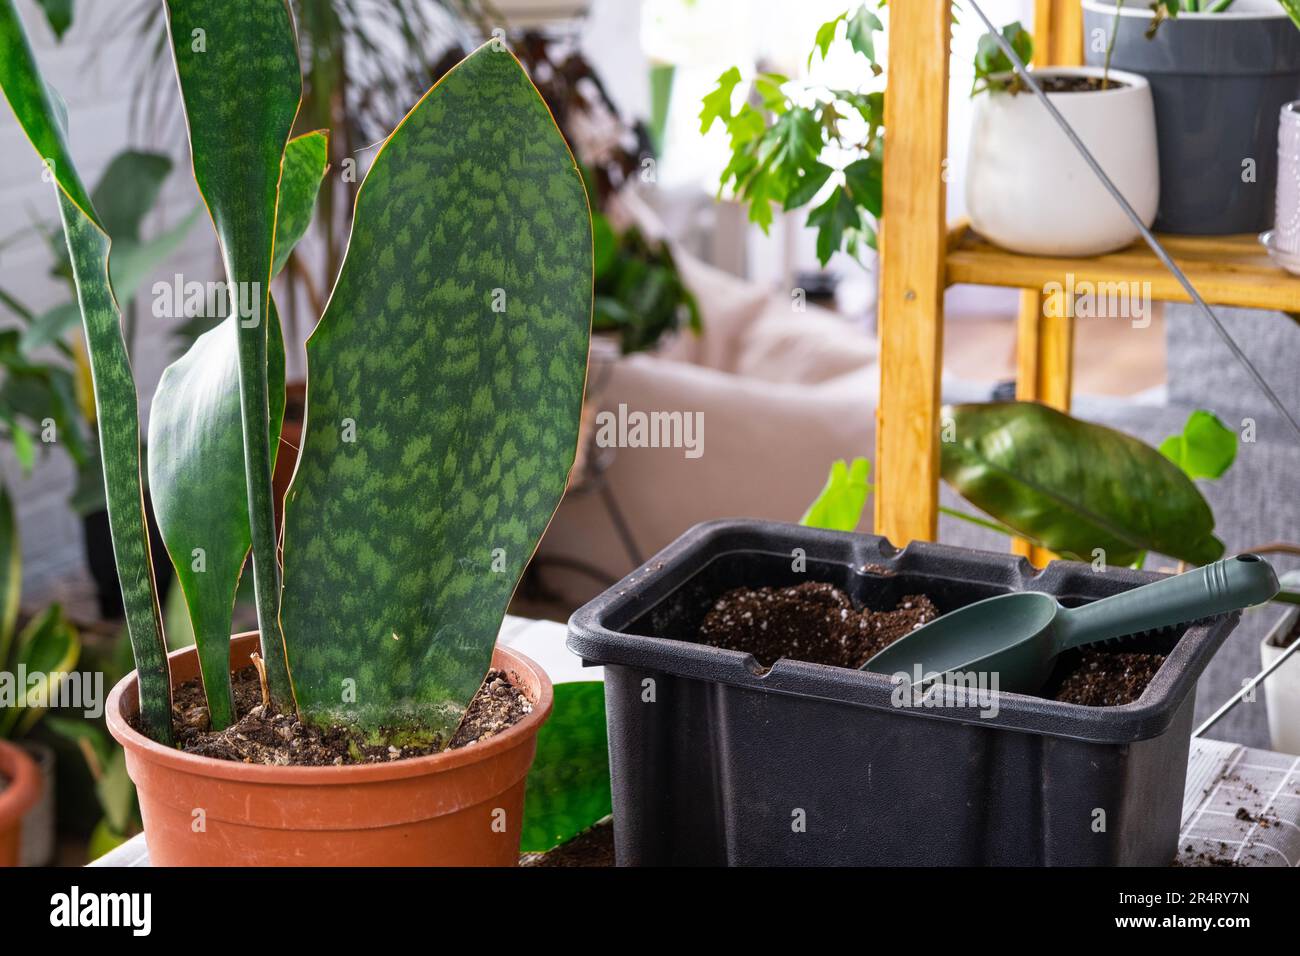 Repotting a home plant succulent sansevieria masoniana big leaf into new pot. Caring for potted plant Stock Photo